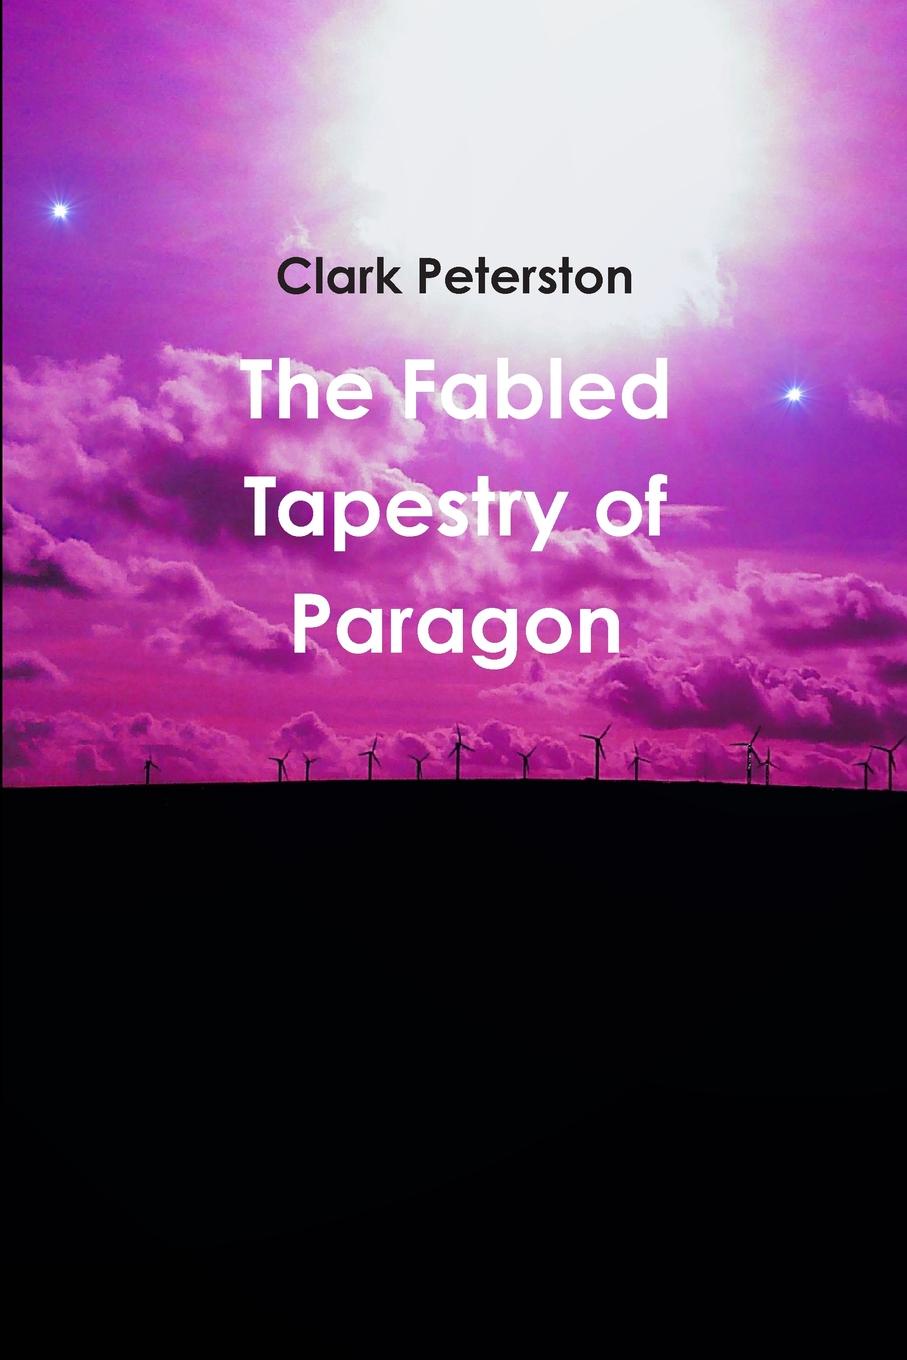 The Fabled Tapestry of Paragon